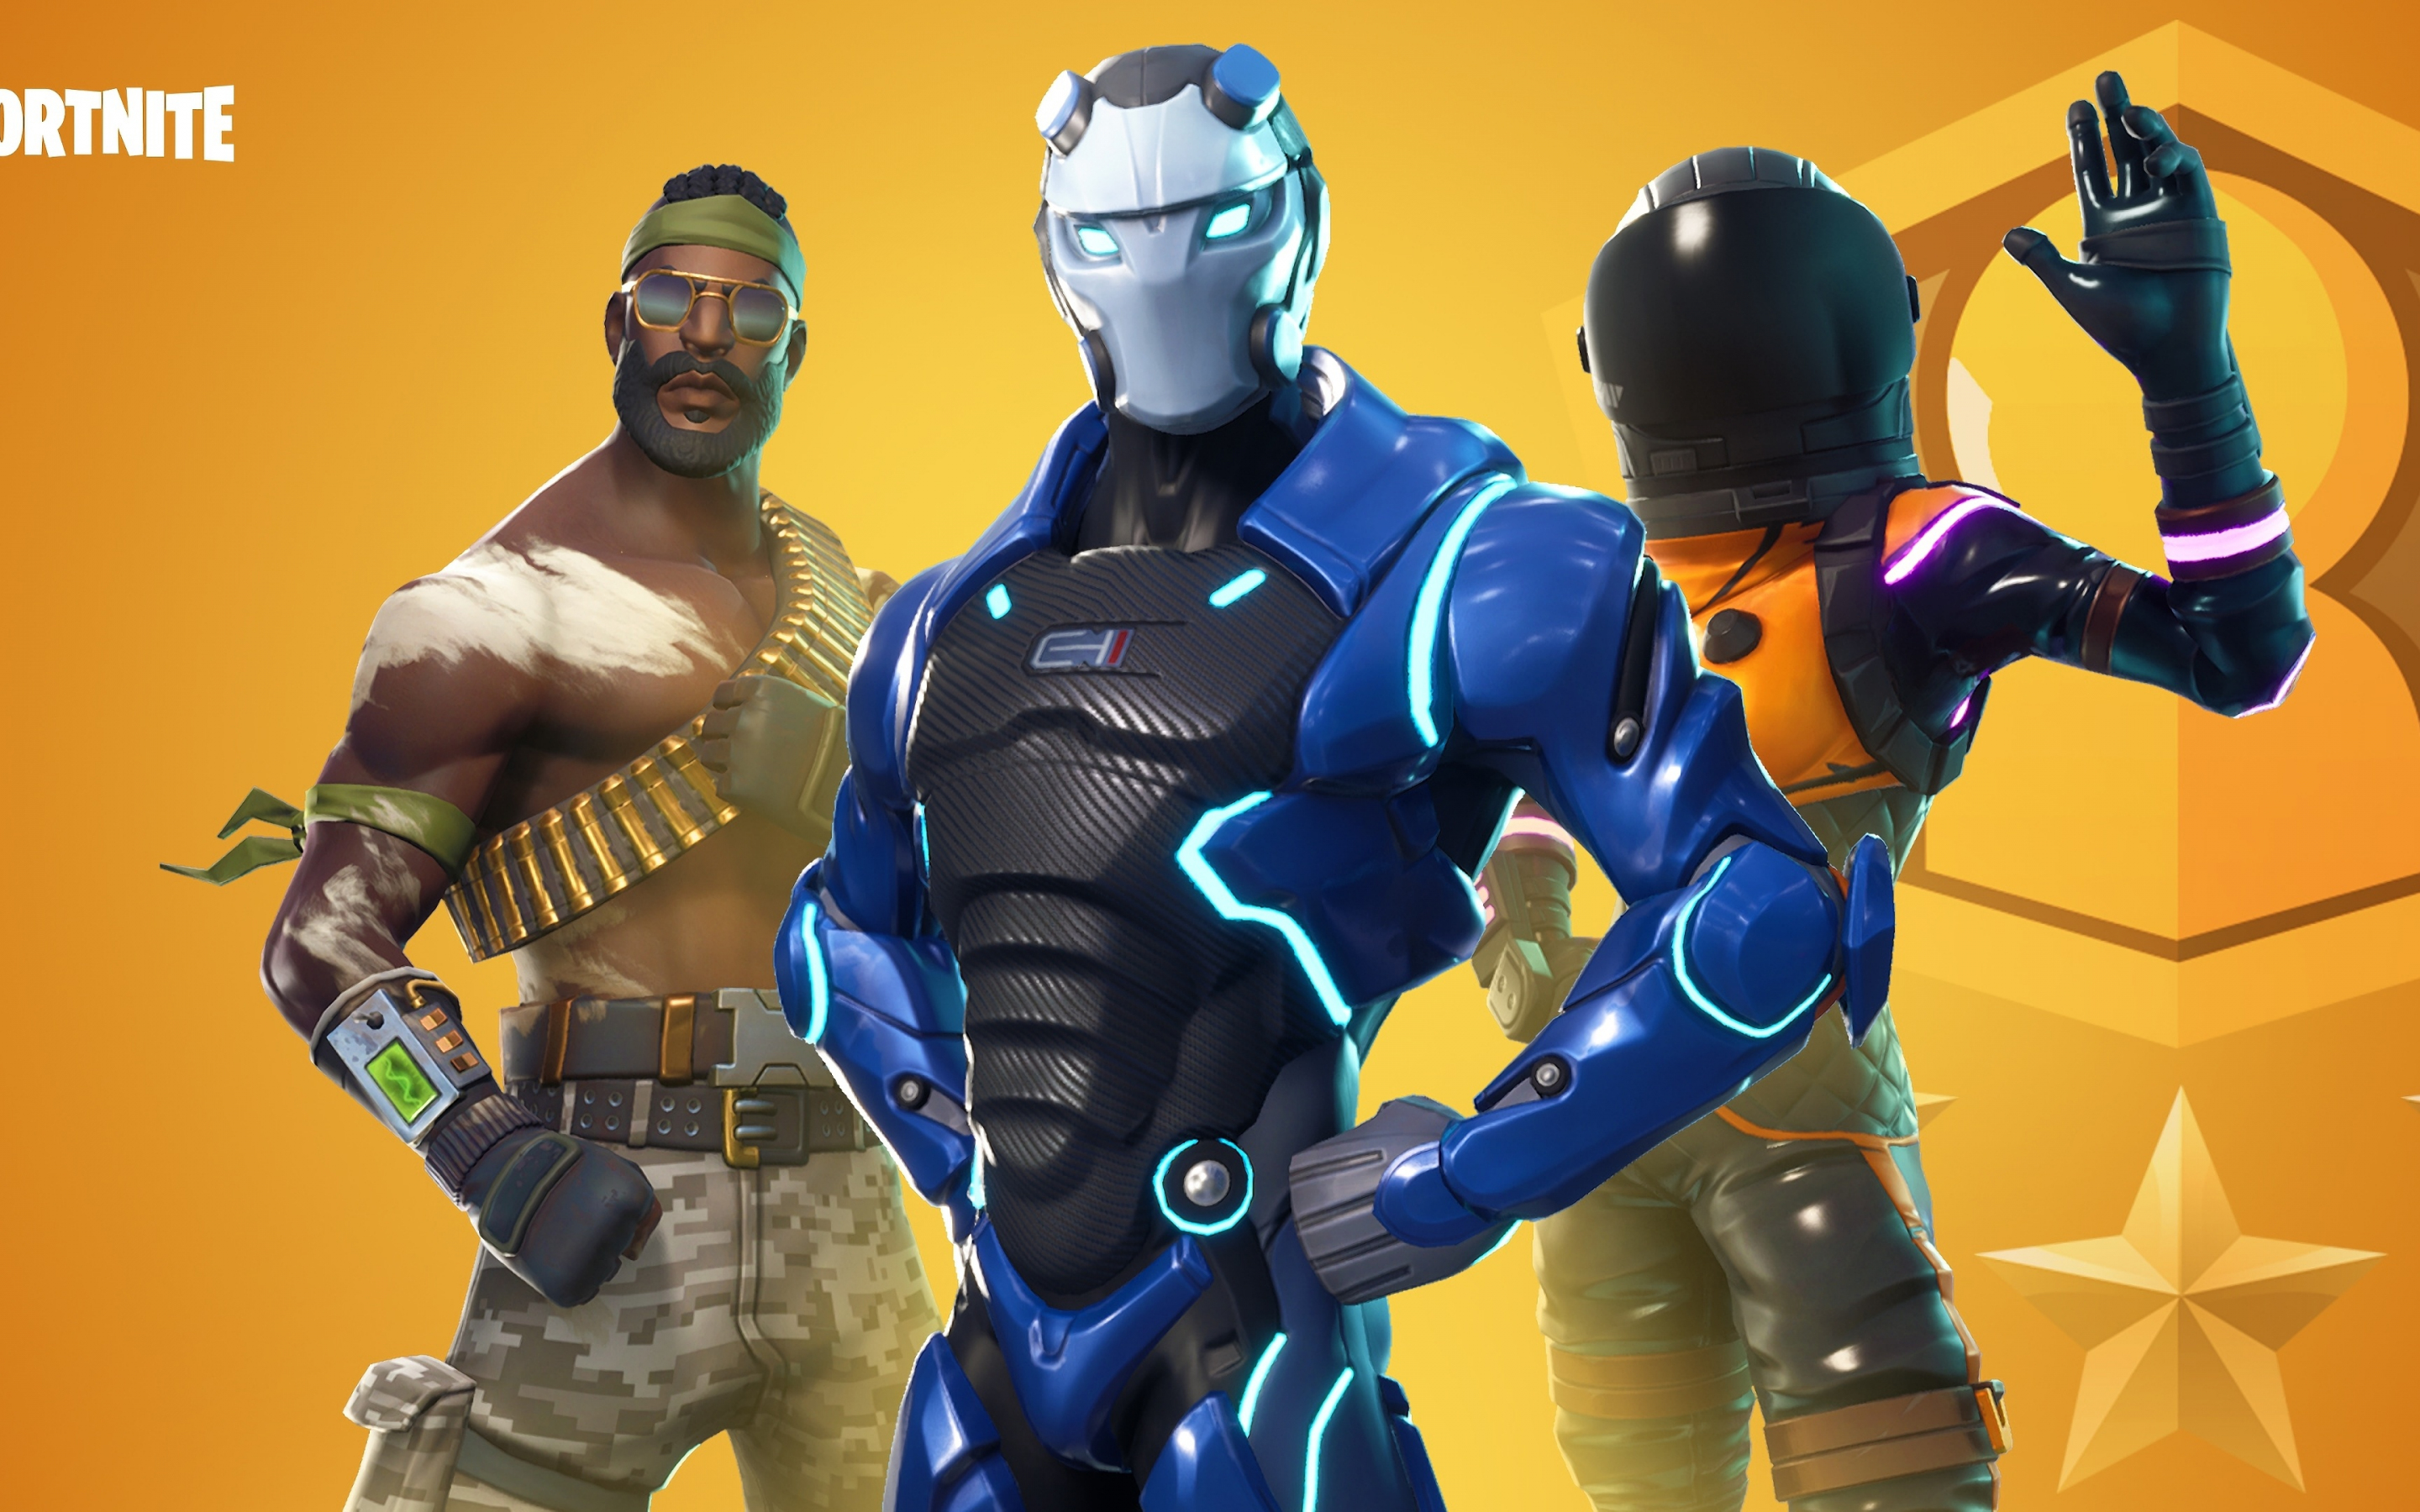 Fortnite, famous, online video game, skin characters, 2880x1800 wallpaper